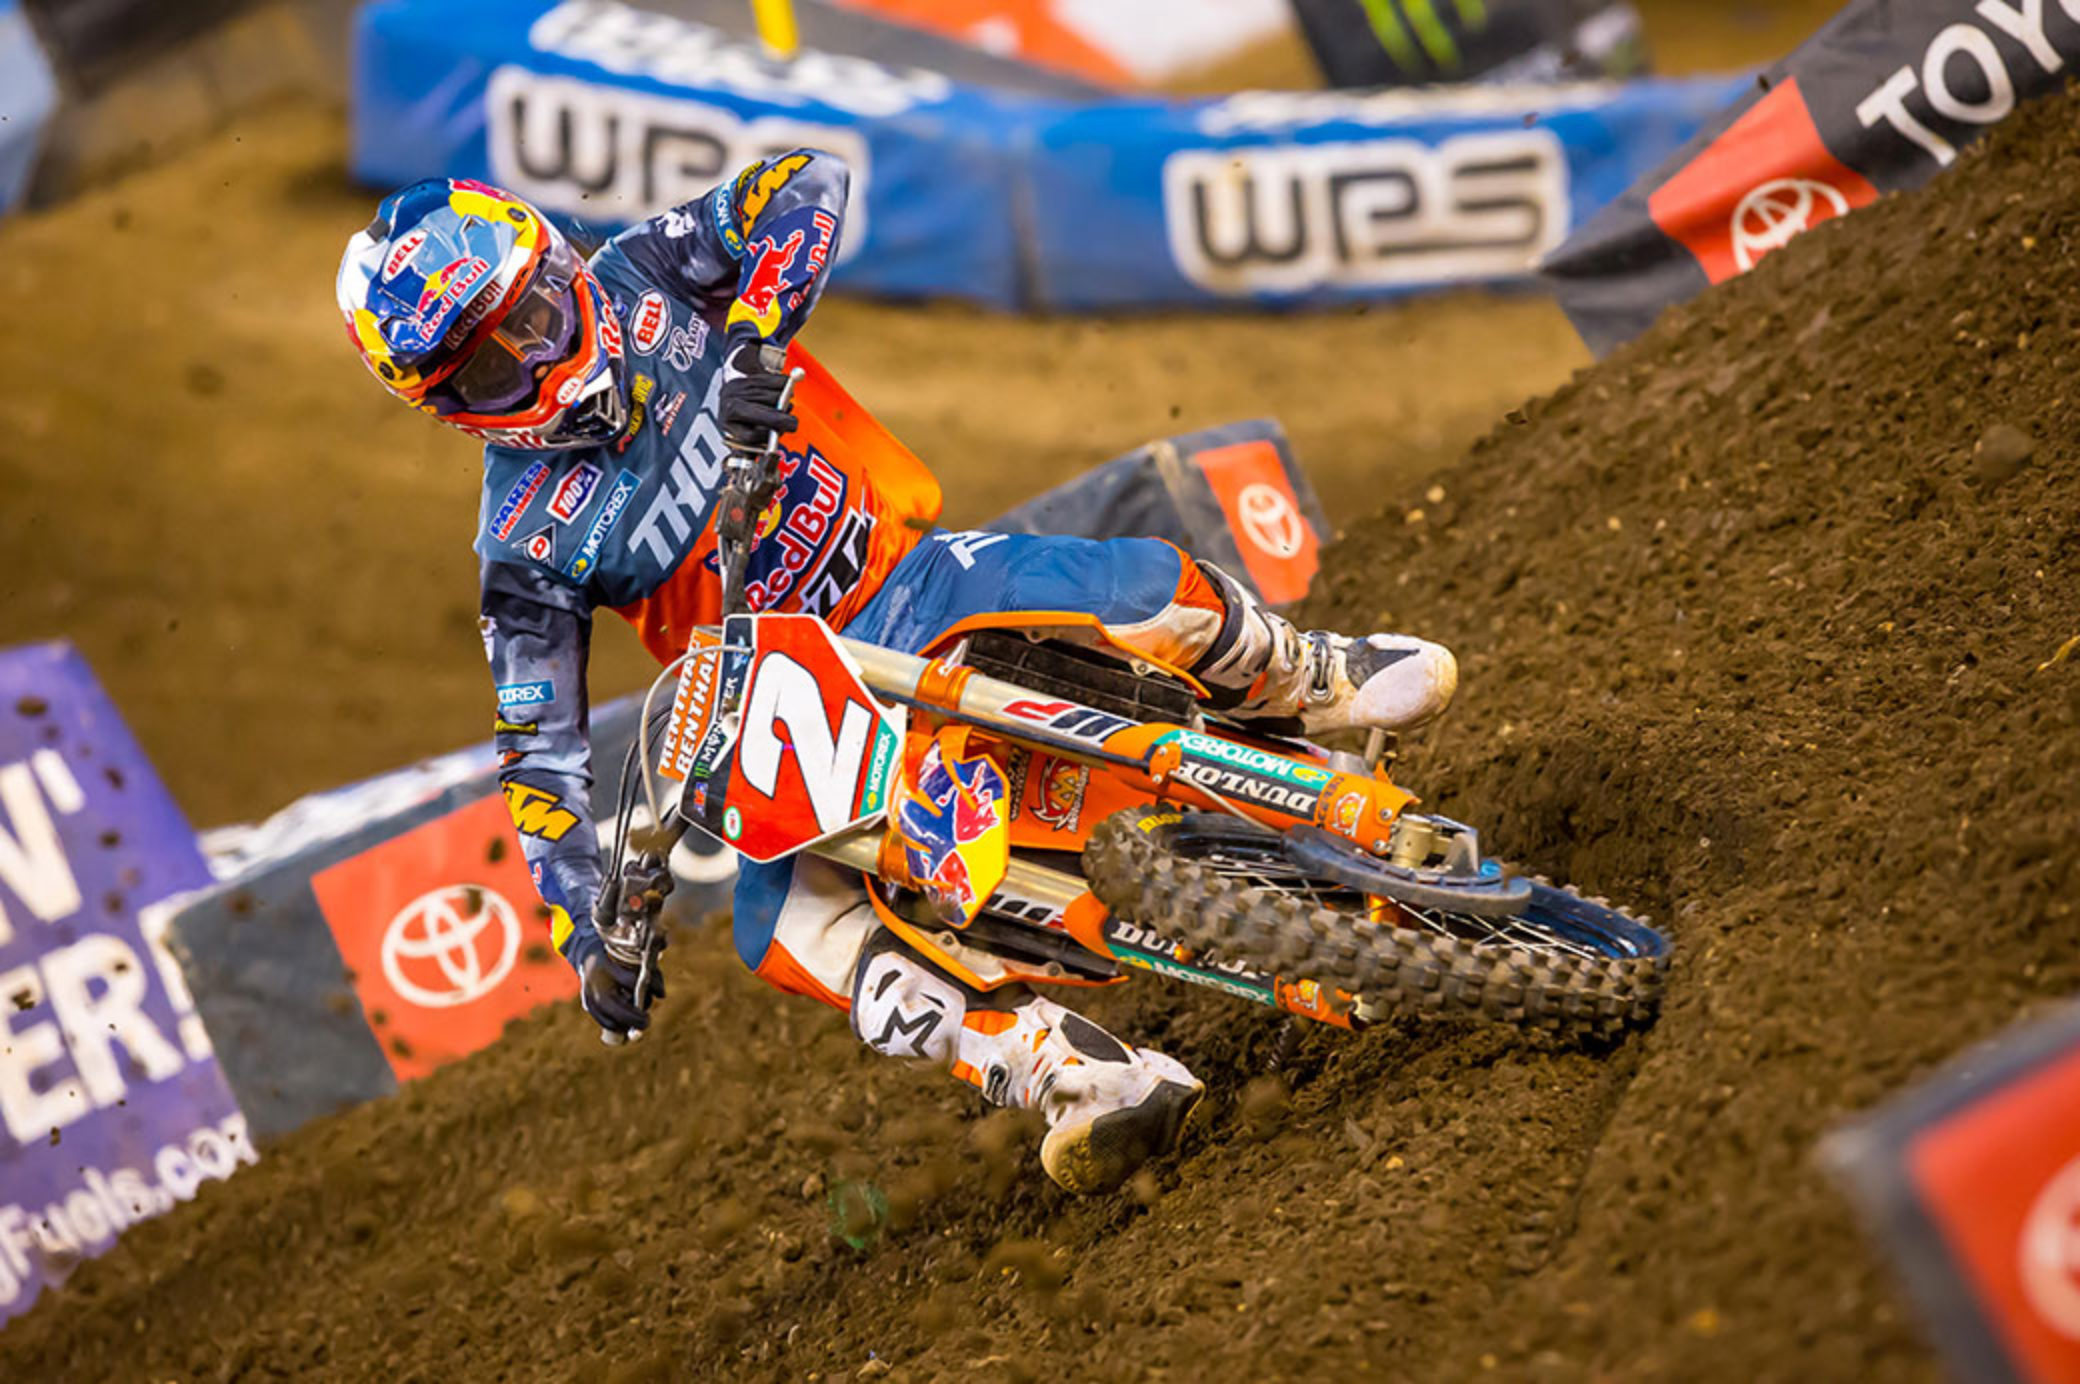 Cooper Webb victory at East Rutherford Supercross title fight goes